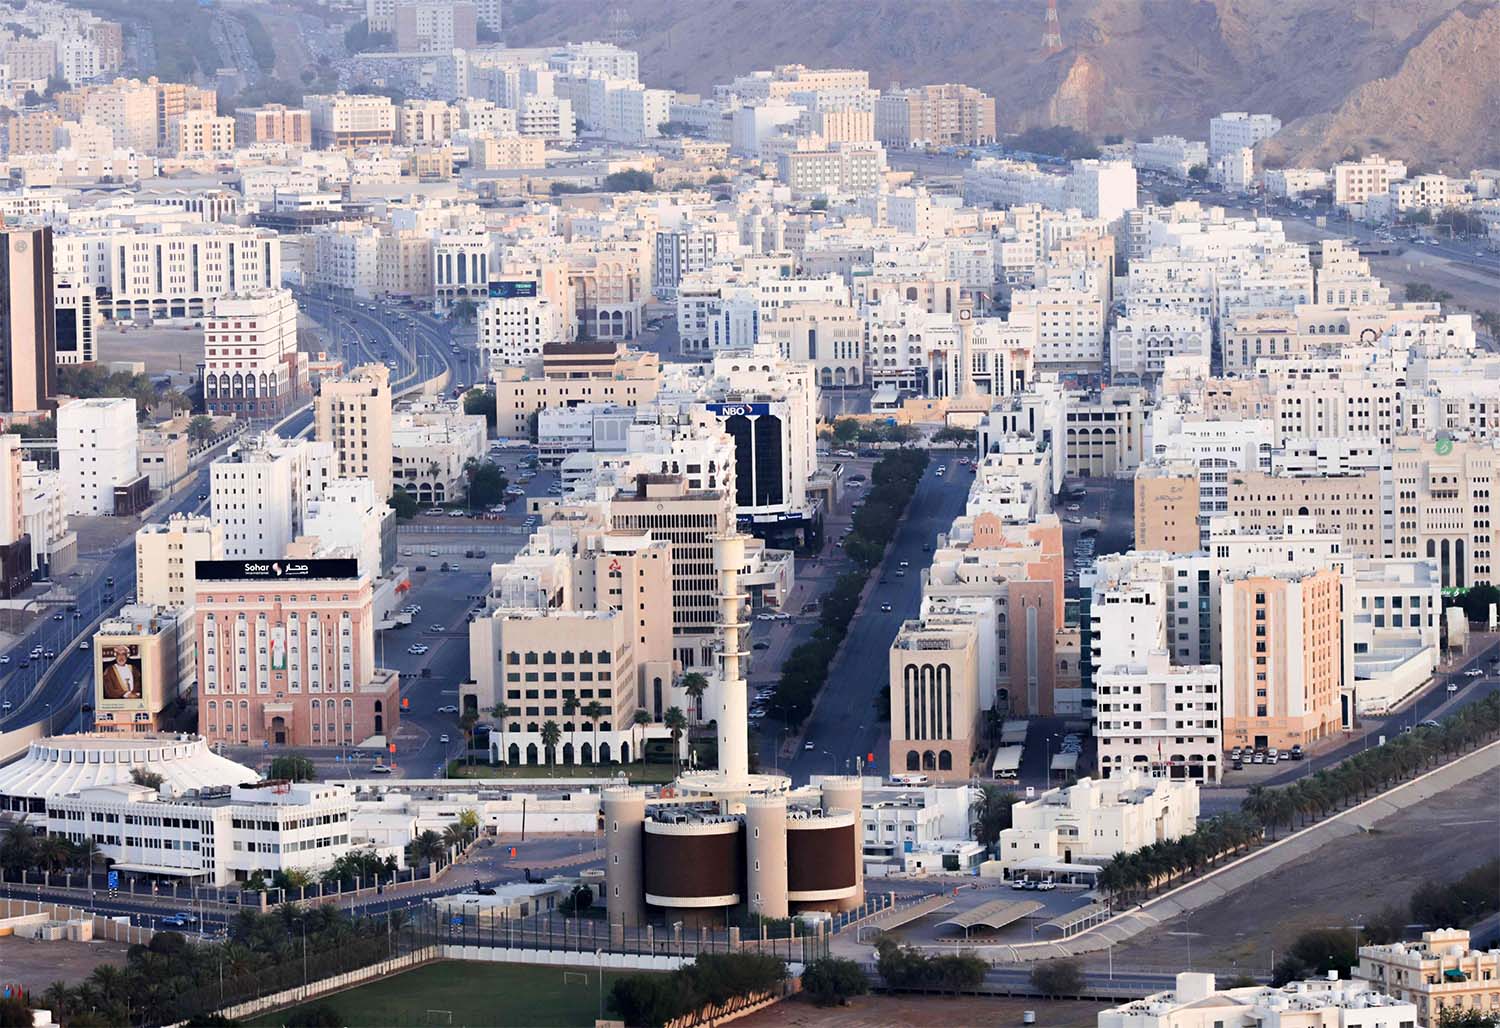 Oman is among the weakest countries financially in the GCC region